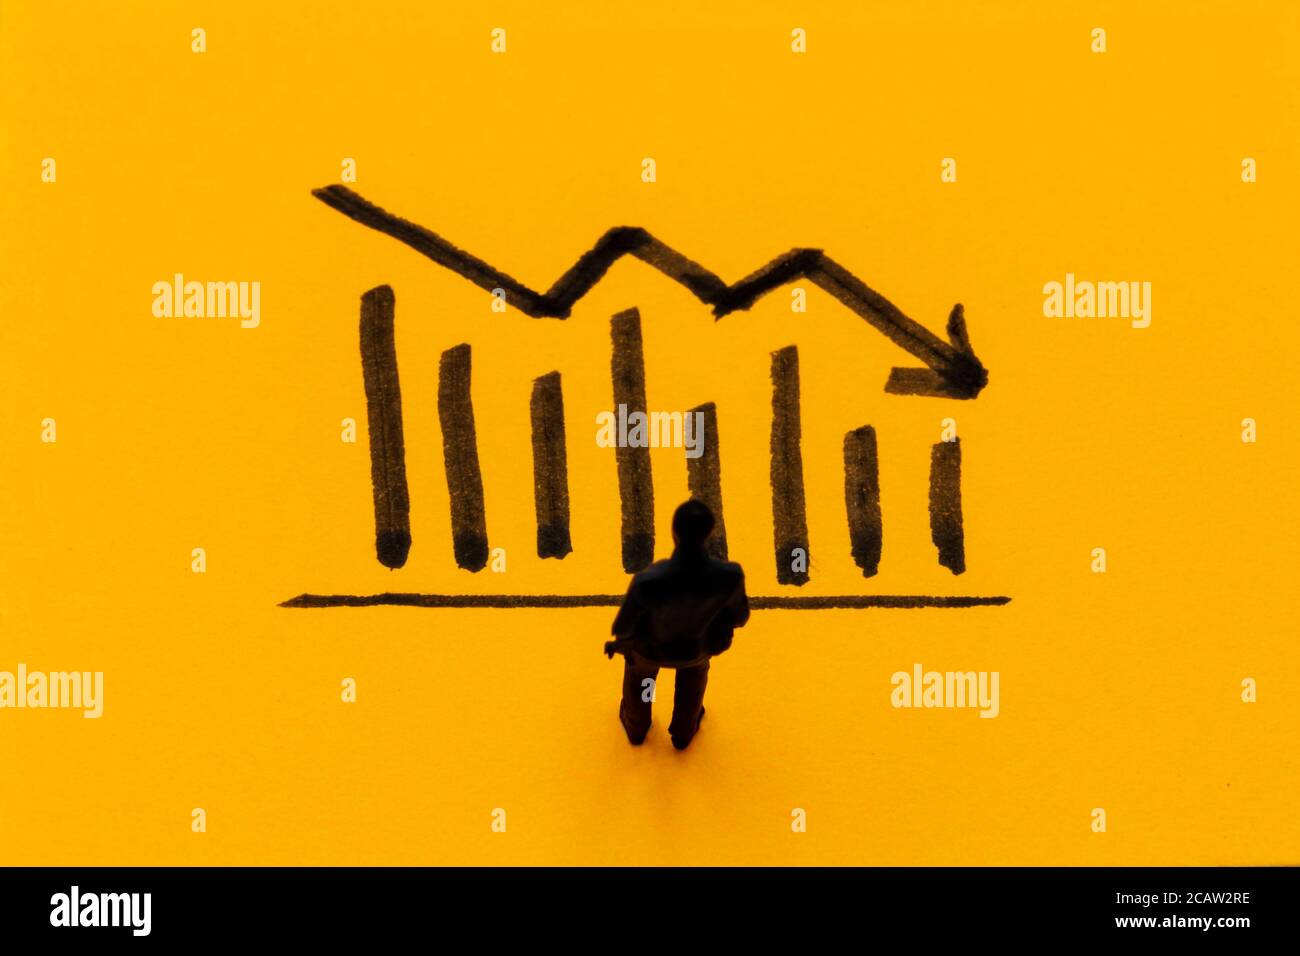 Miniature figurine posed as businessman in front of descending graph, negative performance concept image Stock Photo